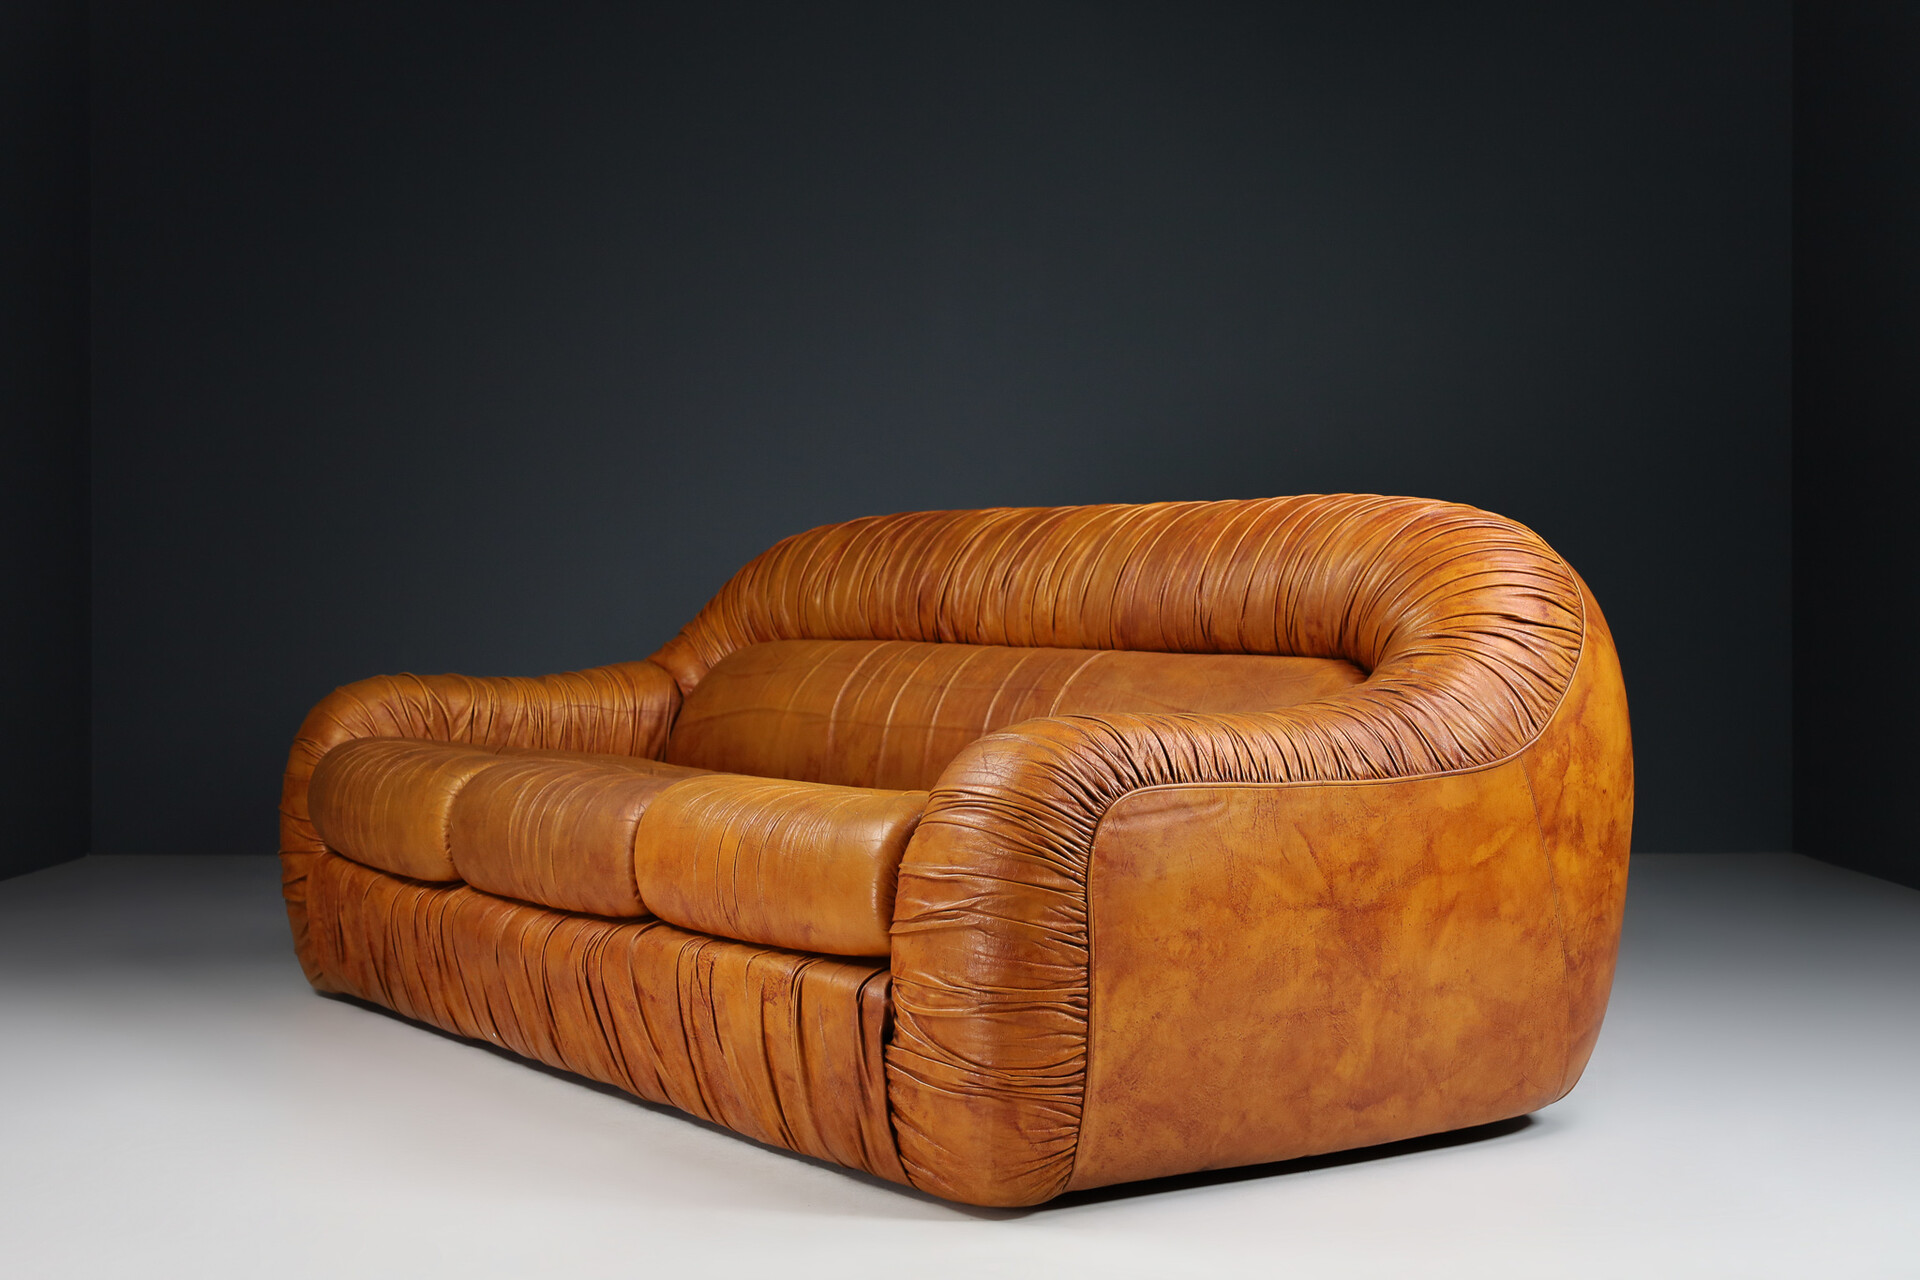 Mid century modern Lounge sofa in Italy \'Capriccio\' Davidowski Seating Late-20th - model Bighinello Sofas brown by - for leather, designed and century Eurosalotto, George 1970s Benches original 